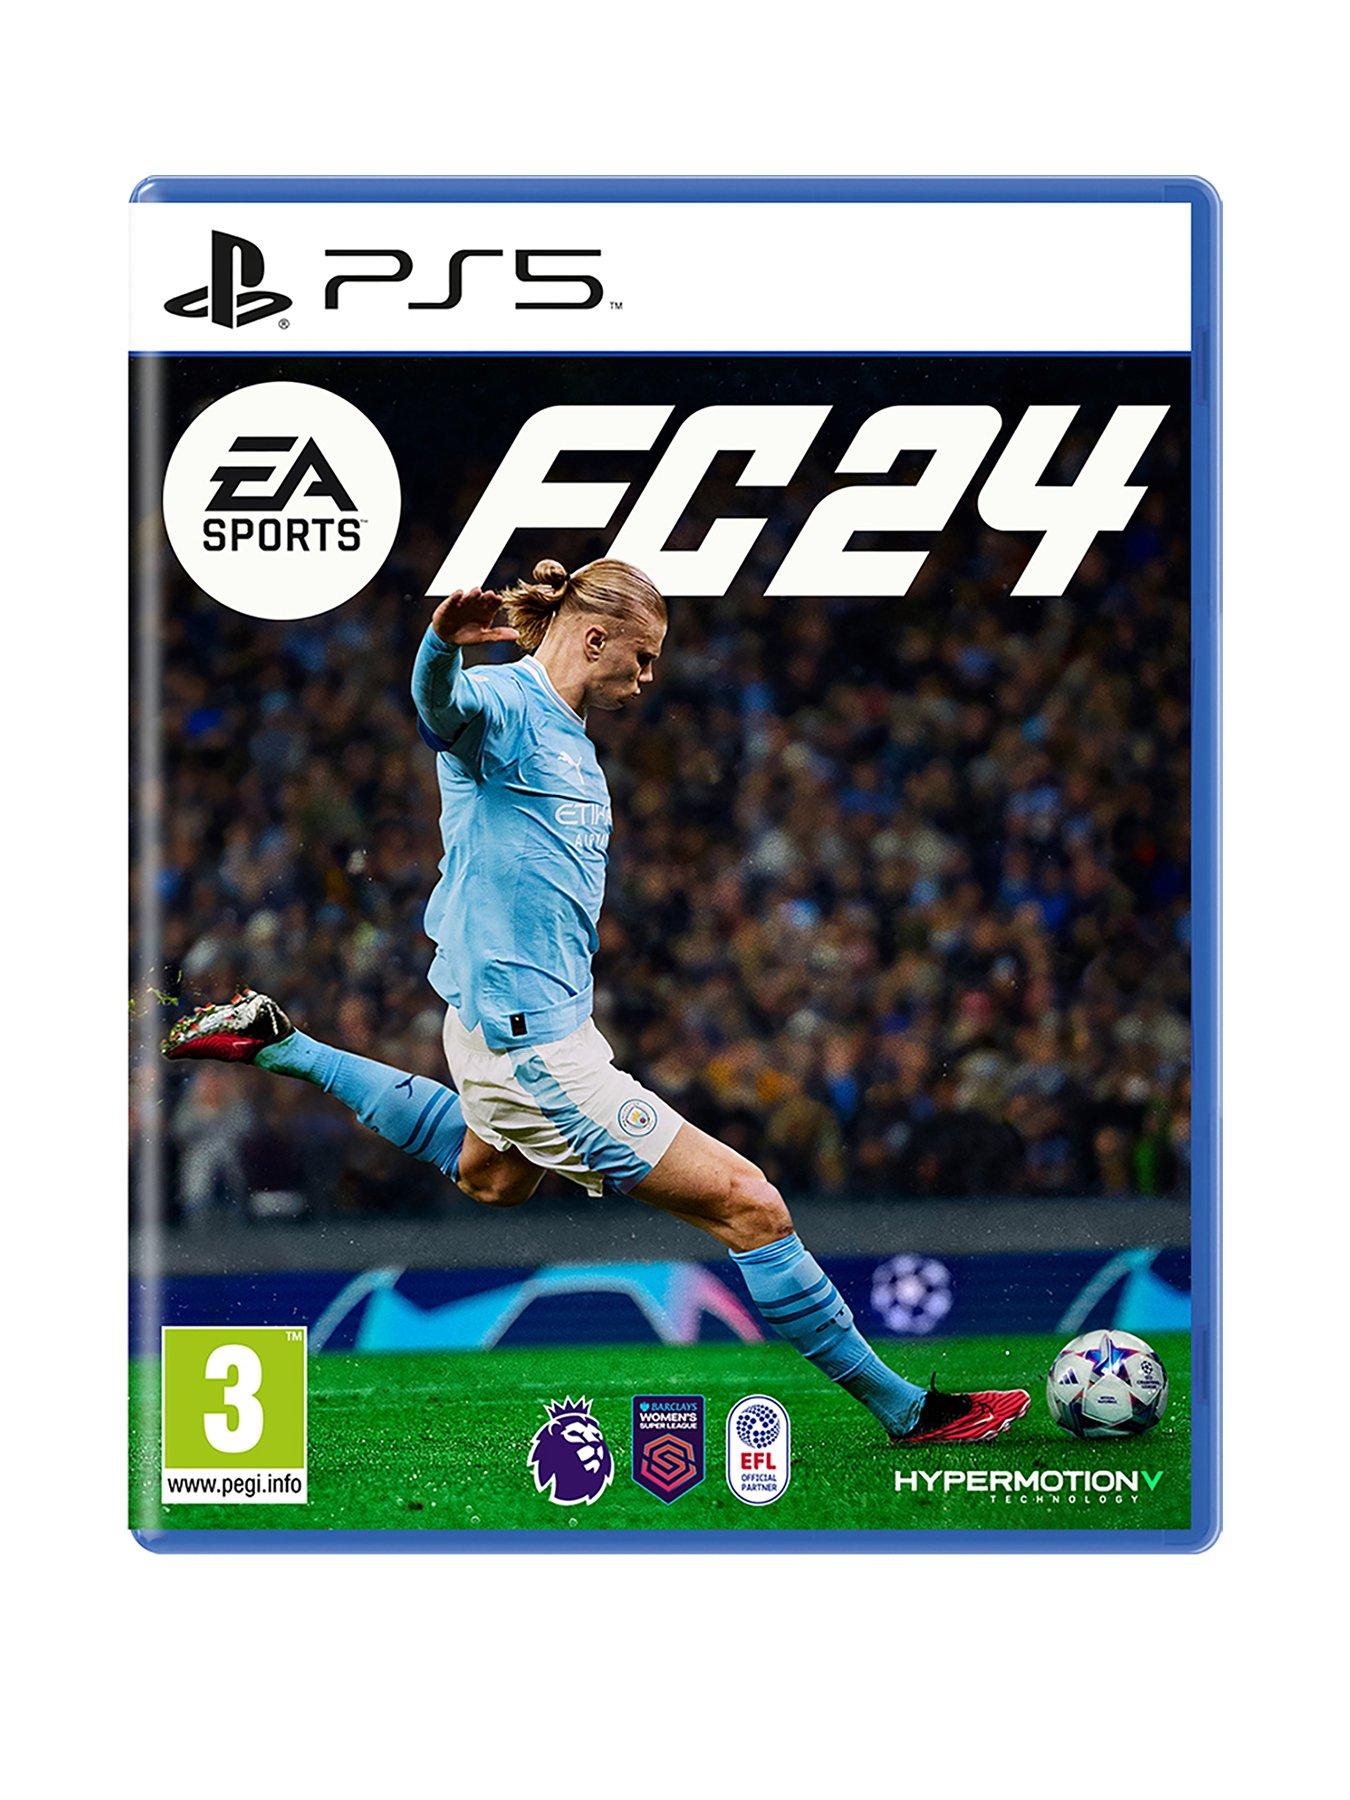 FIFA - Playstation games - Gaming & dvd - www.very.co.uk